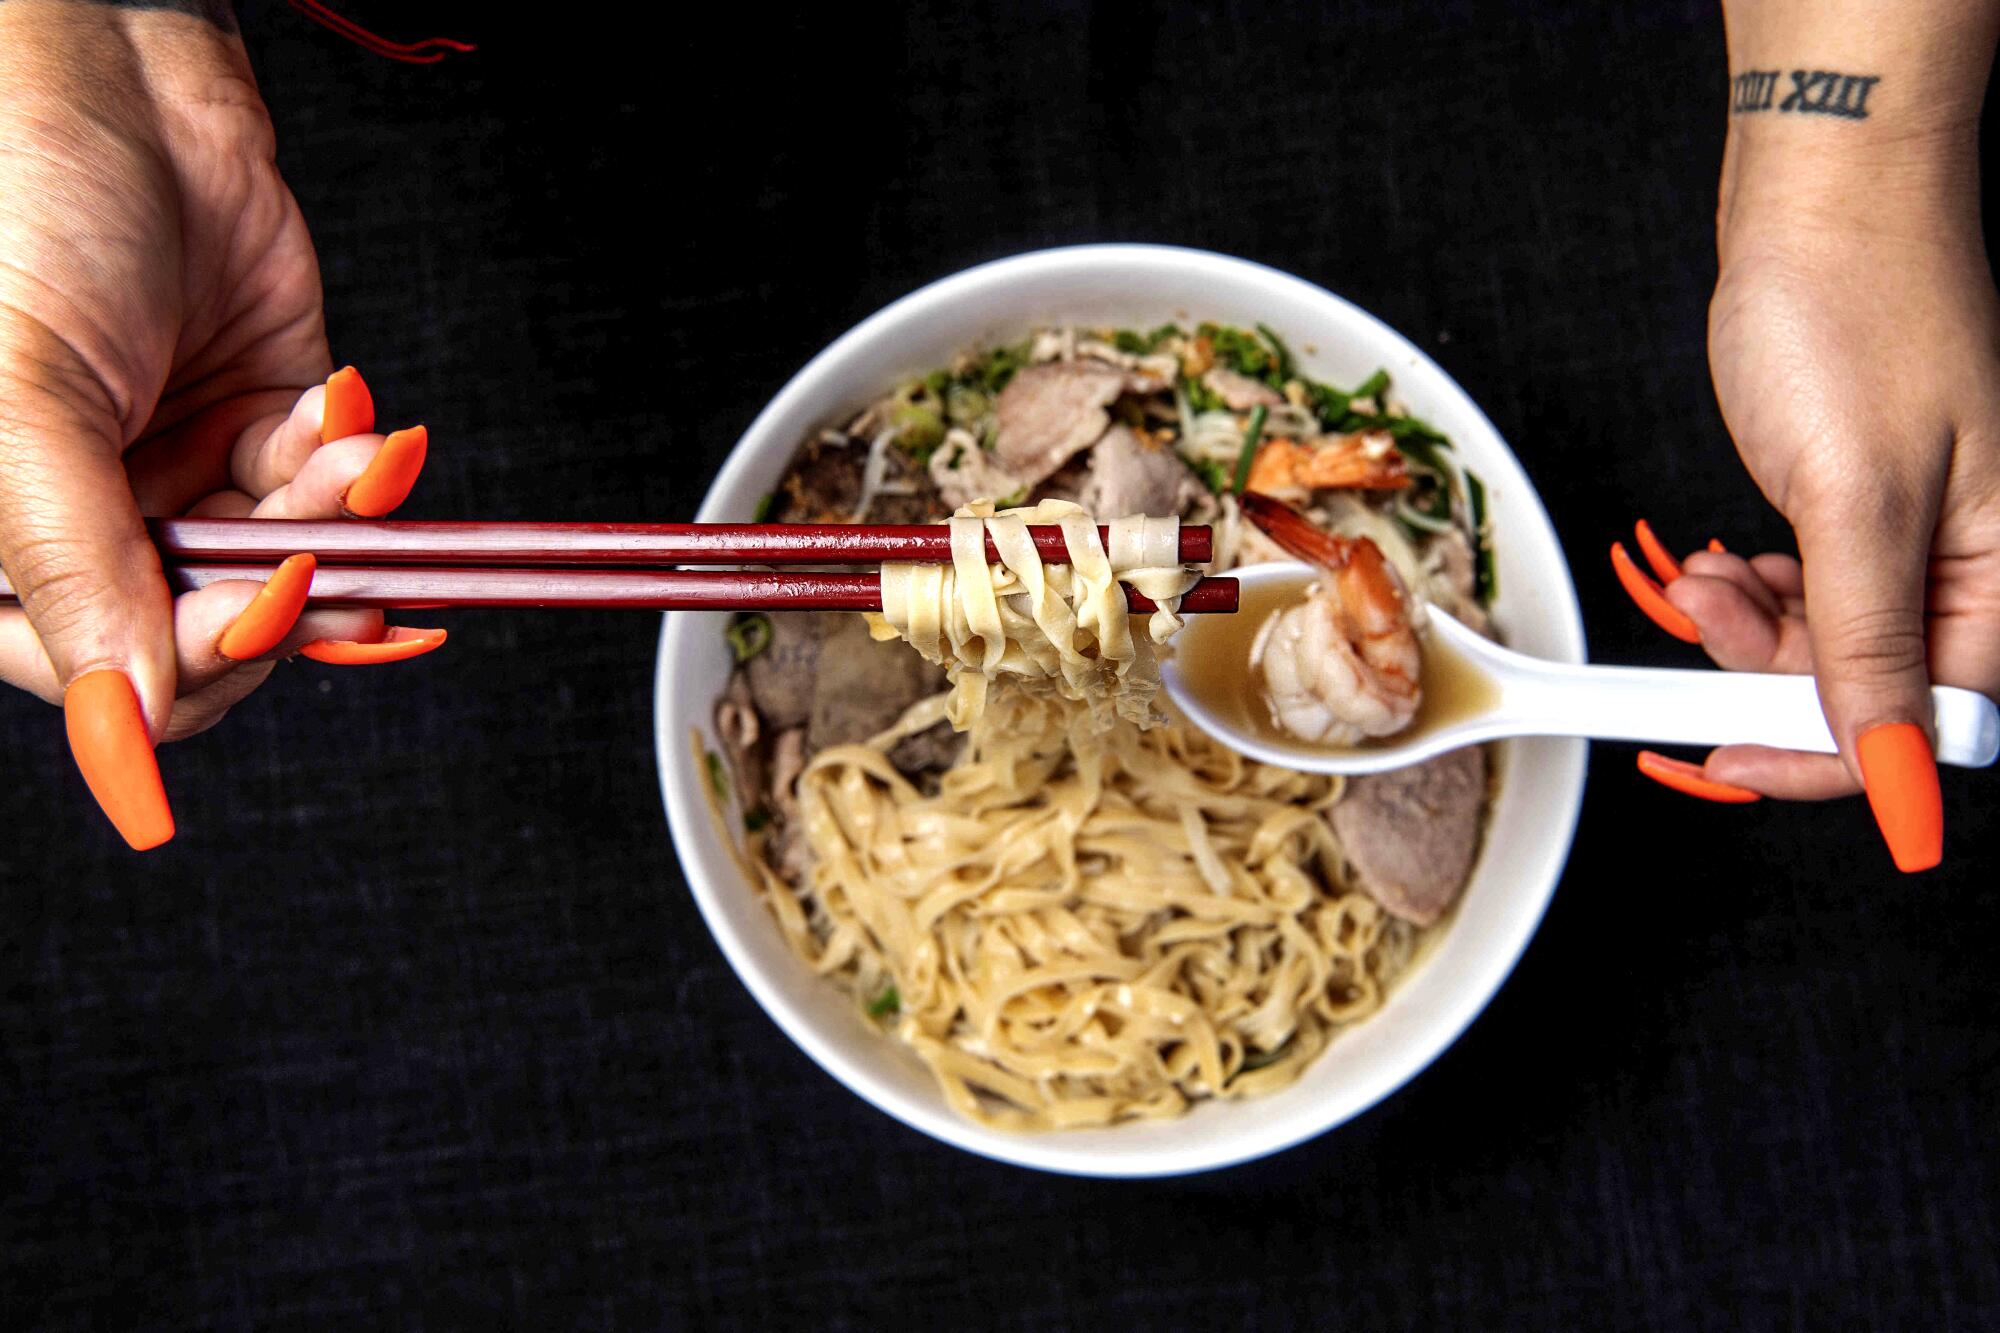 Hands hold chopsticks with noodles and a spoonful of shrimp above a bowl of House Special Noodles.